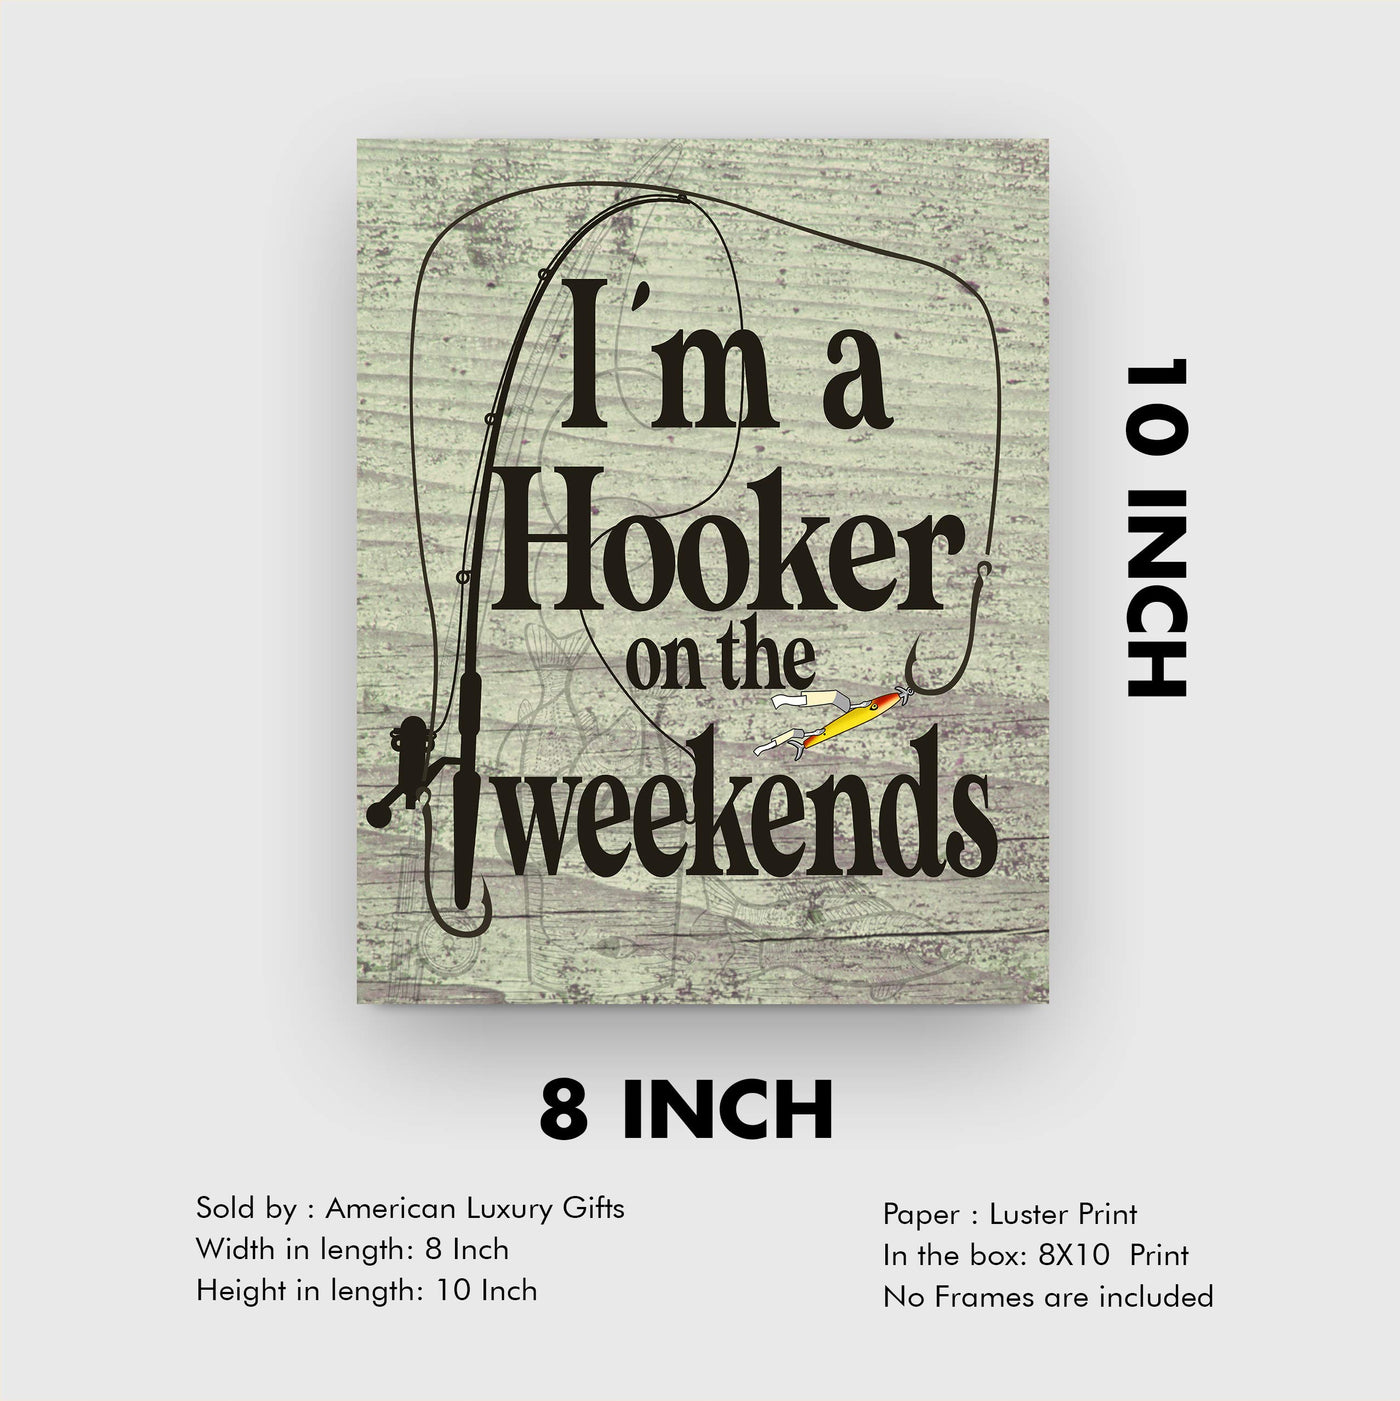 I'm a Hooker on the Weekends-Funny Fishing Wall Print -8x10" Rustic Typographic Art Print-Ready to Frame. Humorous Home-Cabin-Deck-Lodge-Lake Decor. Great Gift for Fishing Lovers! Printed on Paper.